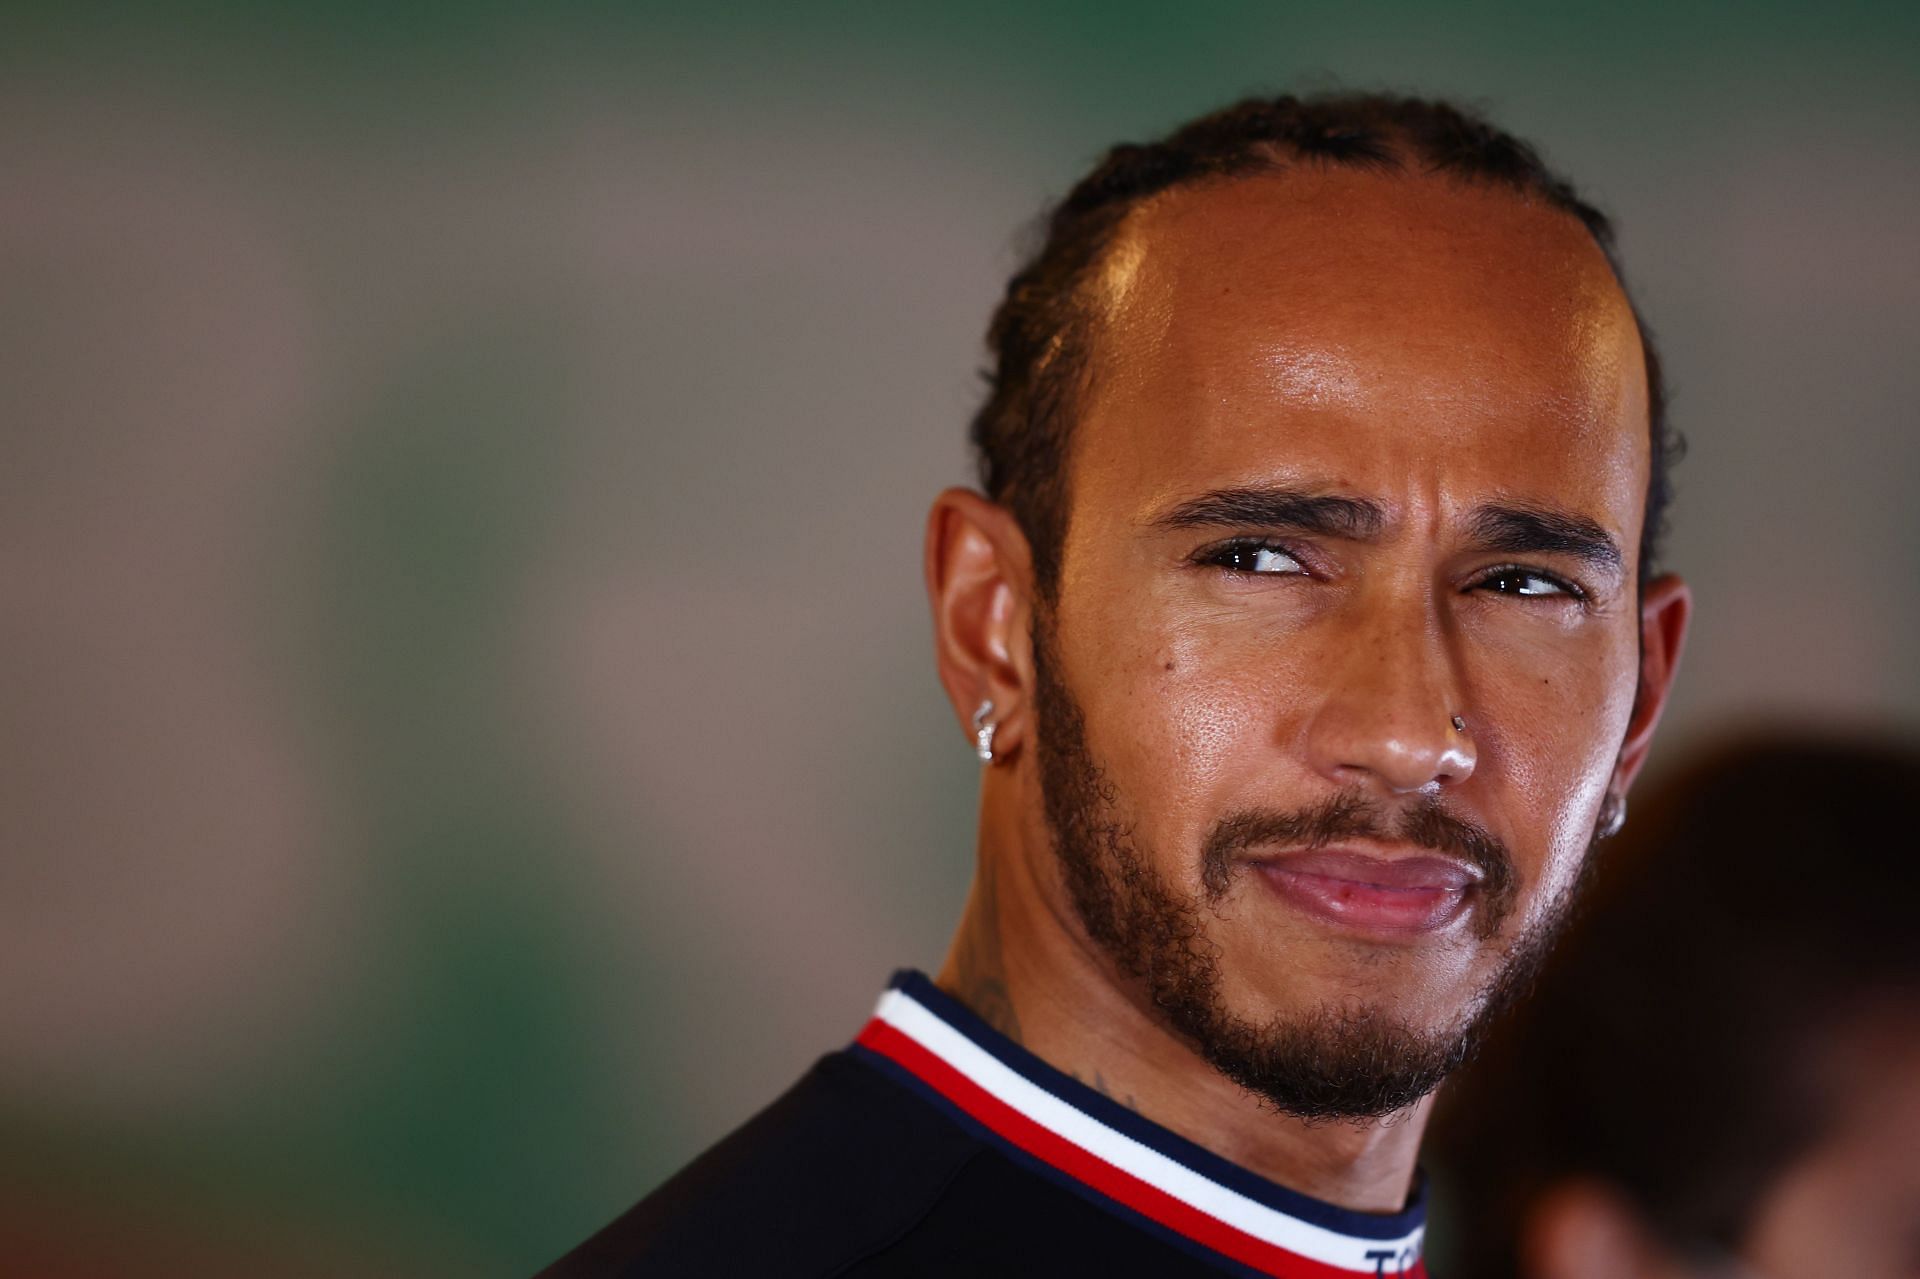 Lewis Hamilton has been named as 2021 woeld champion by (Photo by Mark Thompson/Getty Images)